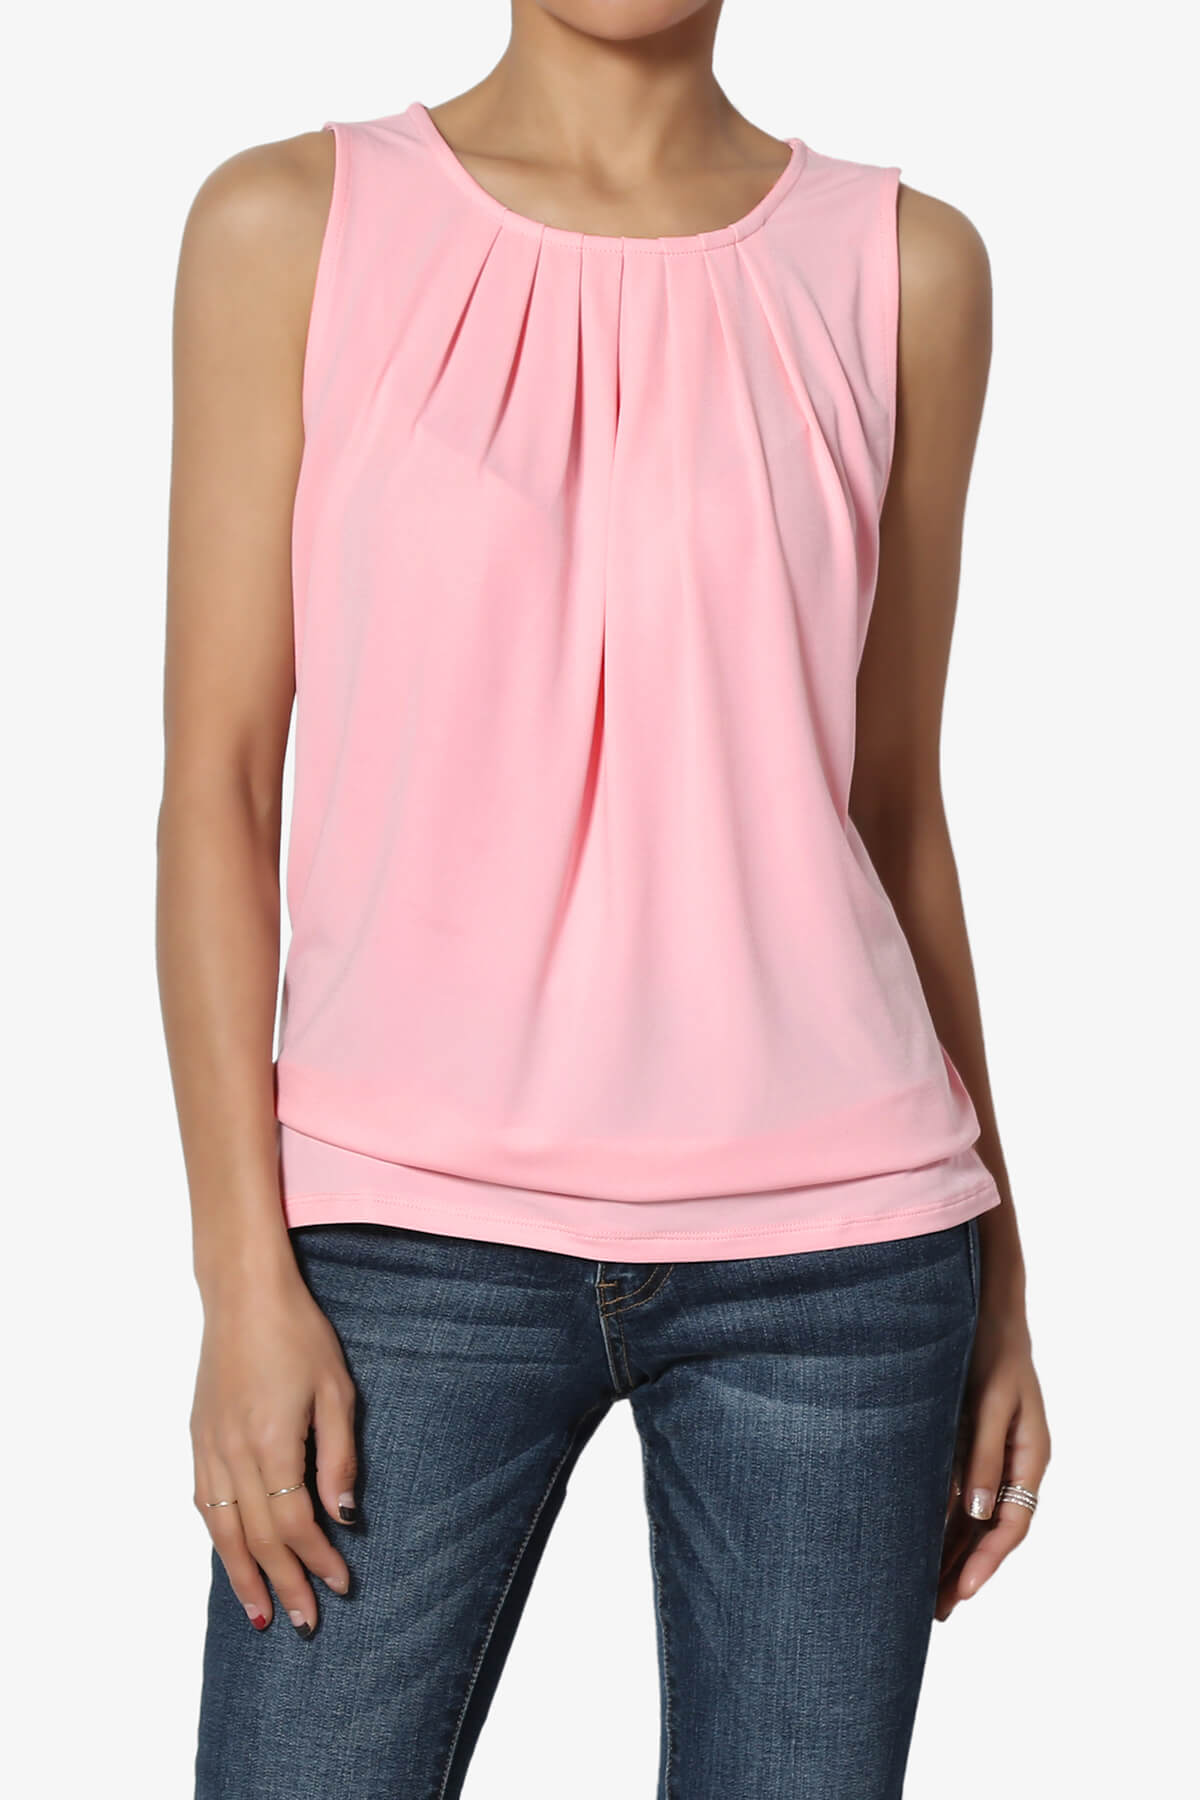 Load image into Gallery viewer, Chaffee Pleat Neck Tank Top BRIGHT PINK_1
